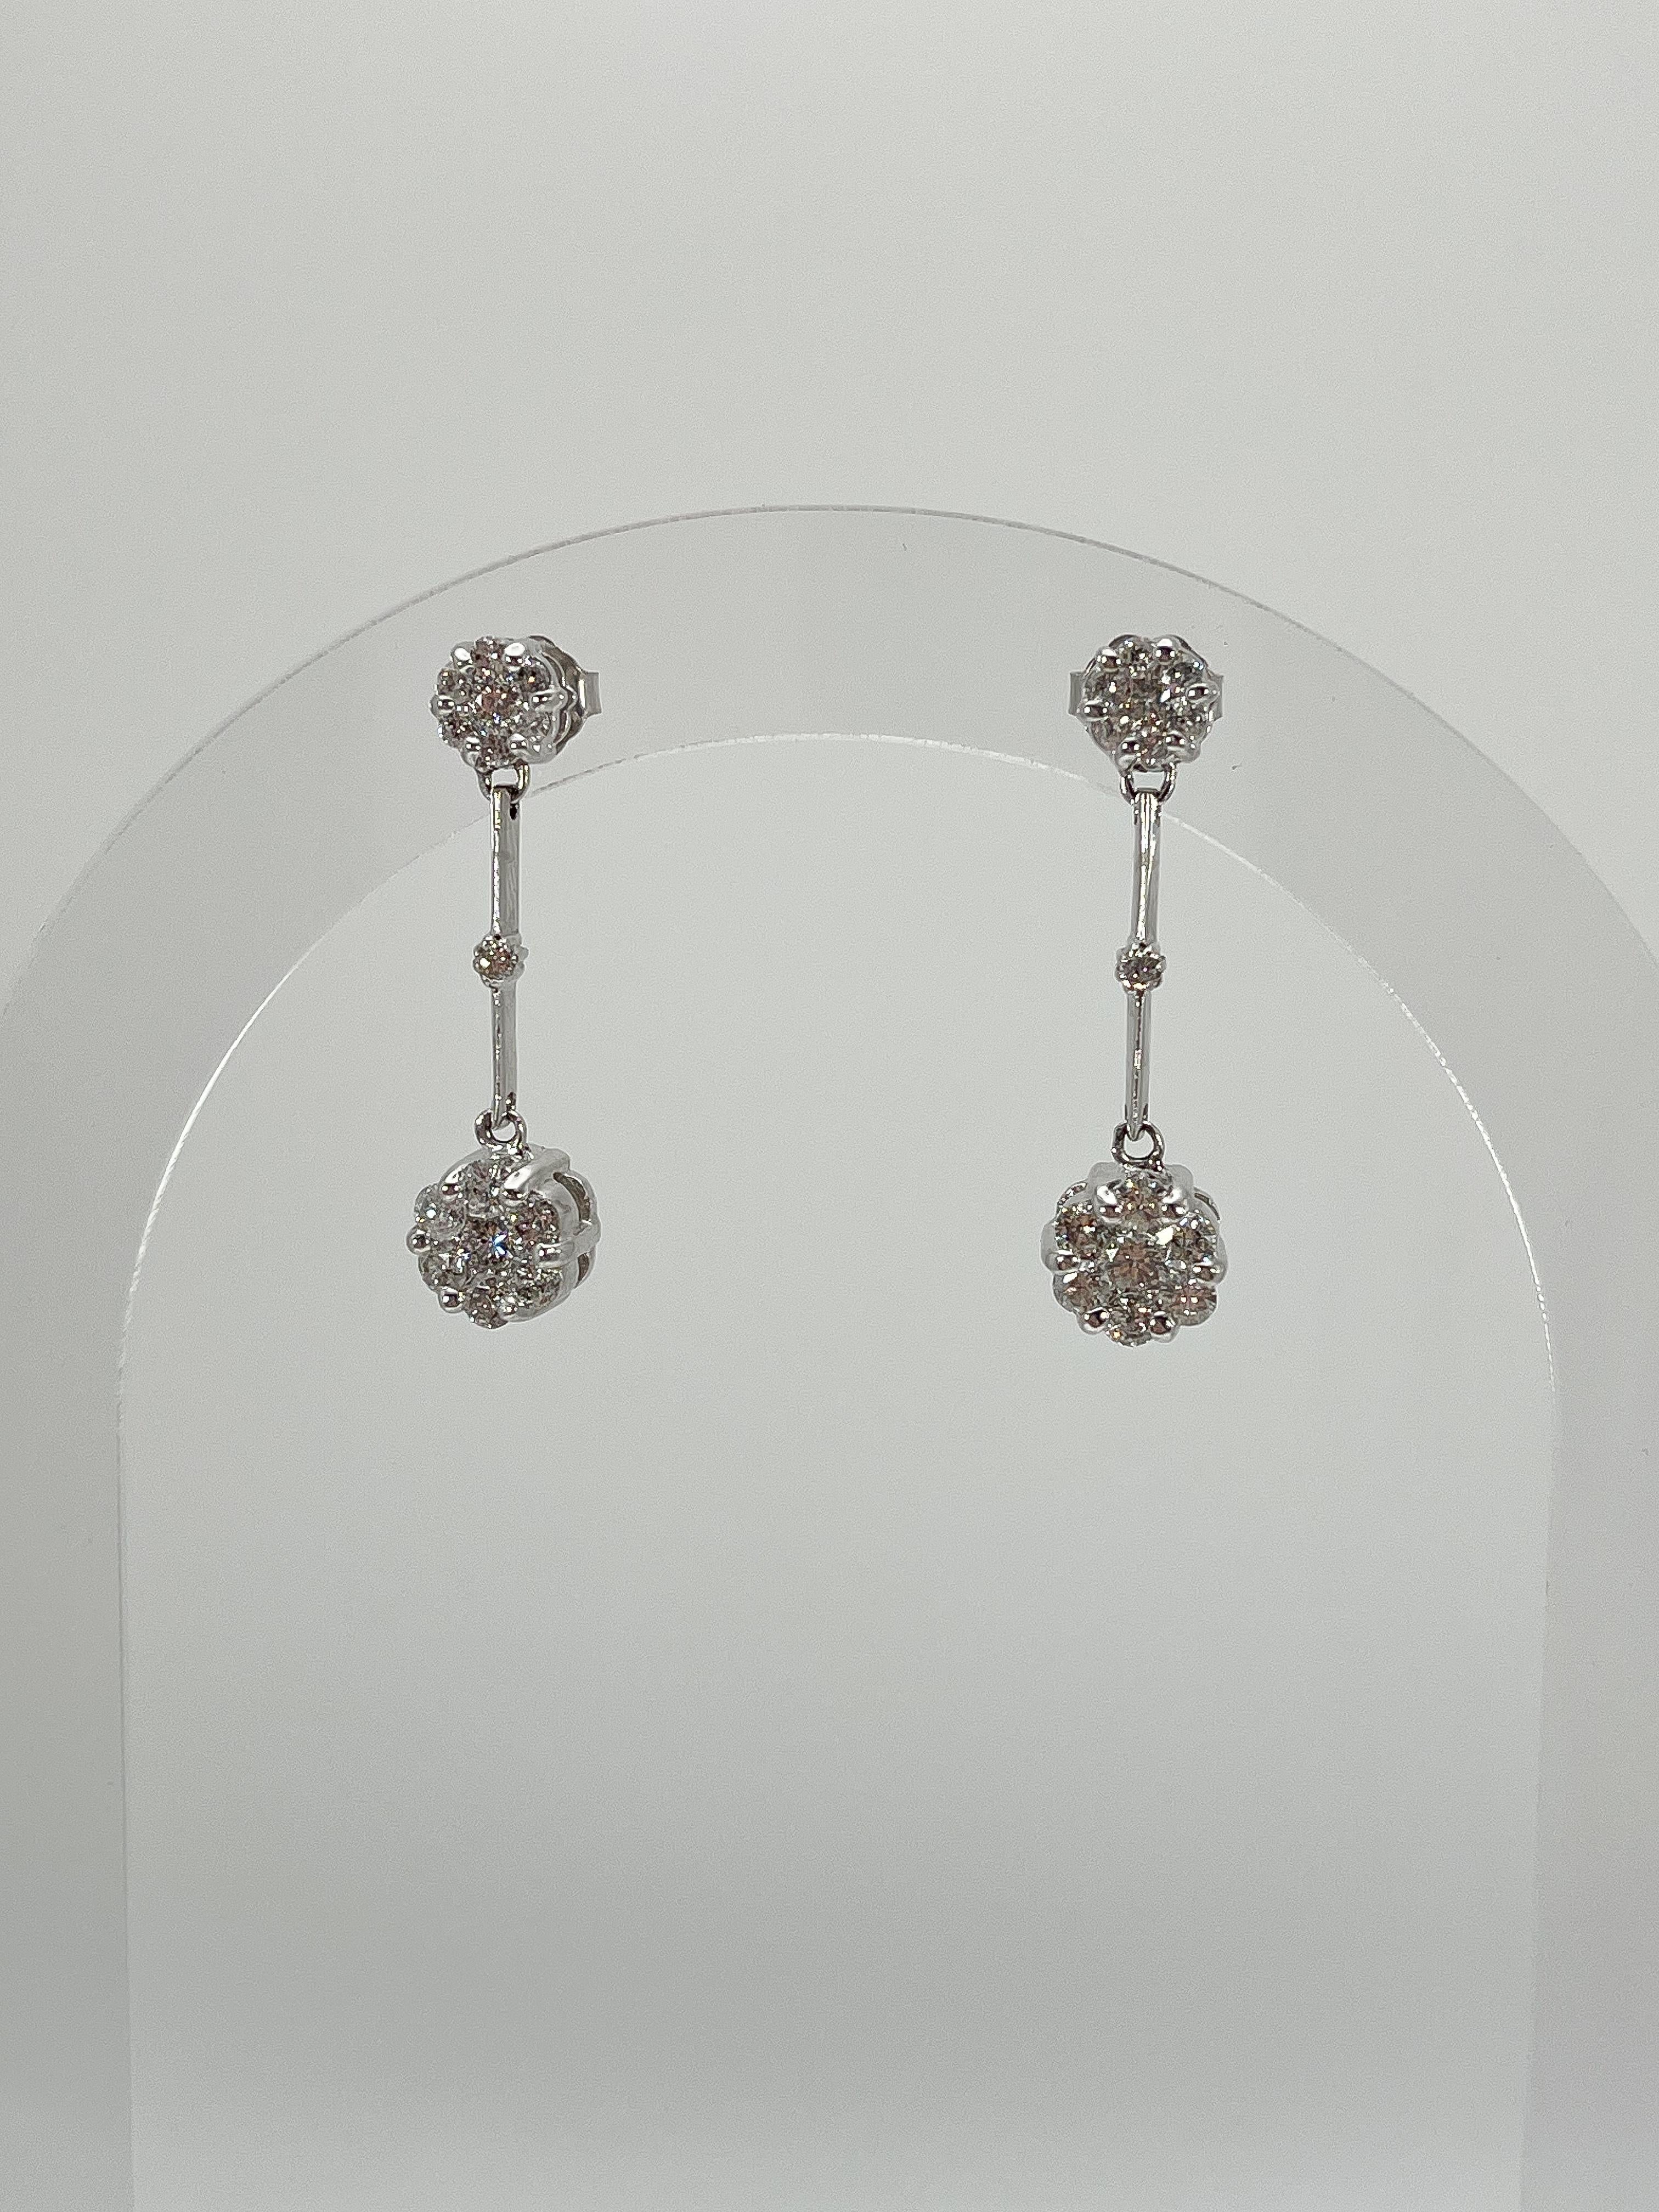 14k white gold 1 CTW diamond drop cluster earrings. These earrings have one cluster at the top, a diamond in the center, and one on the bottom. The length of these earrings have a length of 29 mm, a width of 7.8 mm, and a weight of 4.6 grams. 